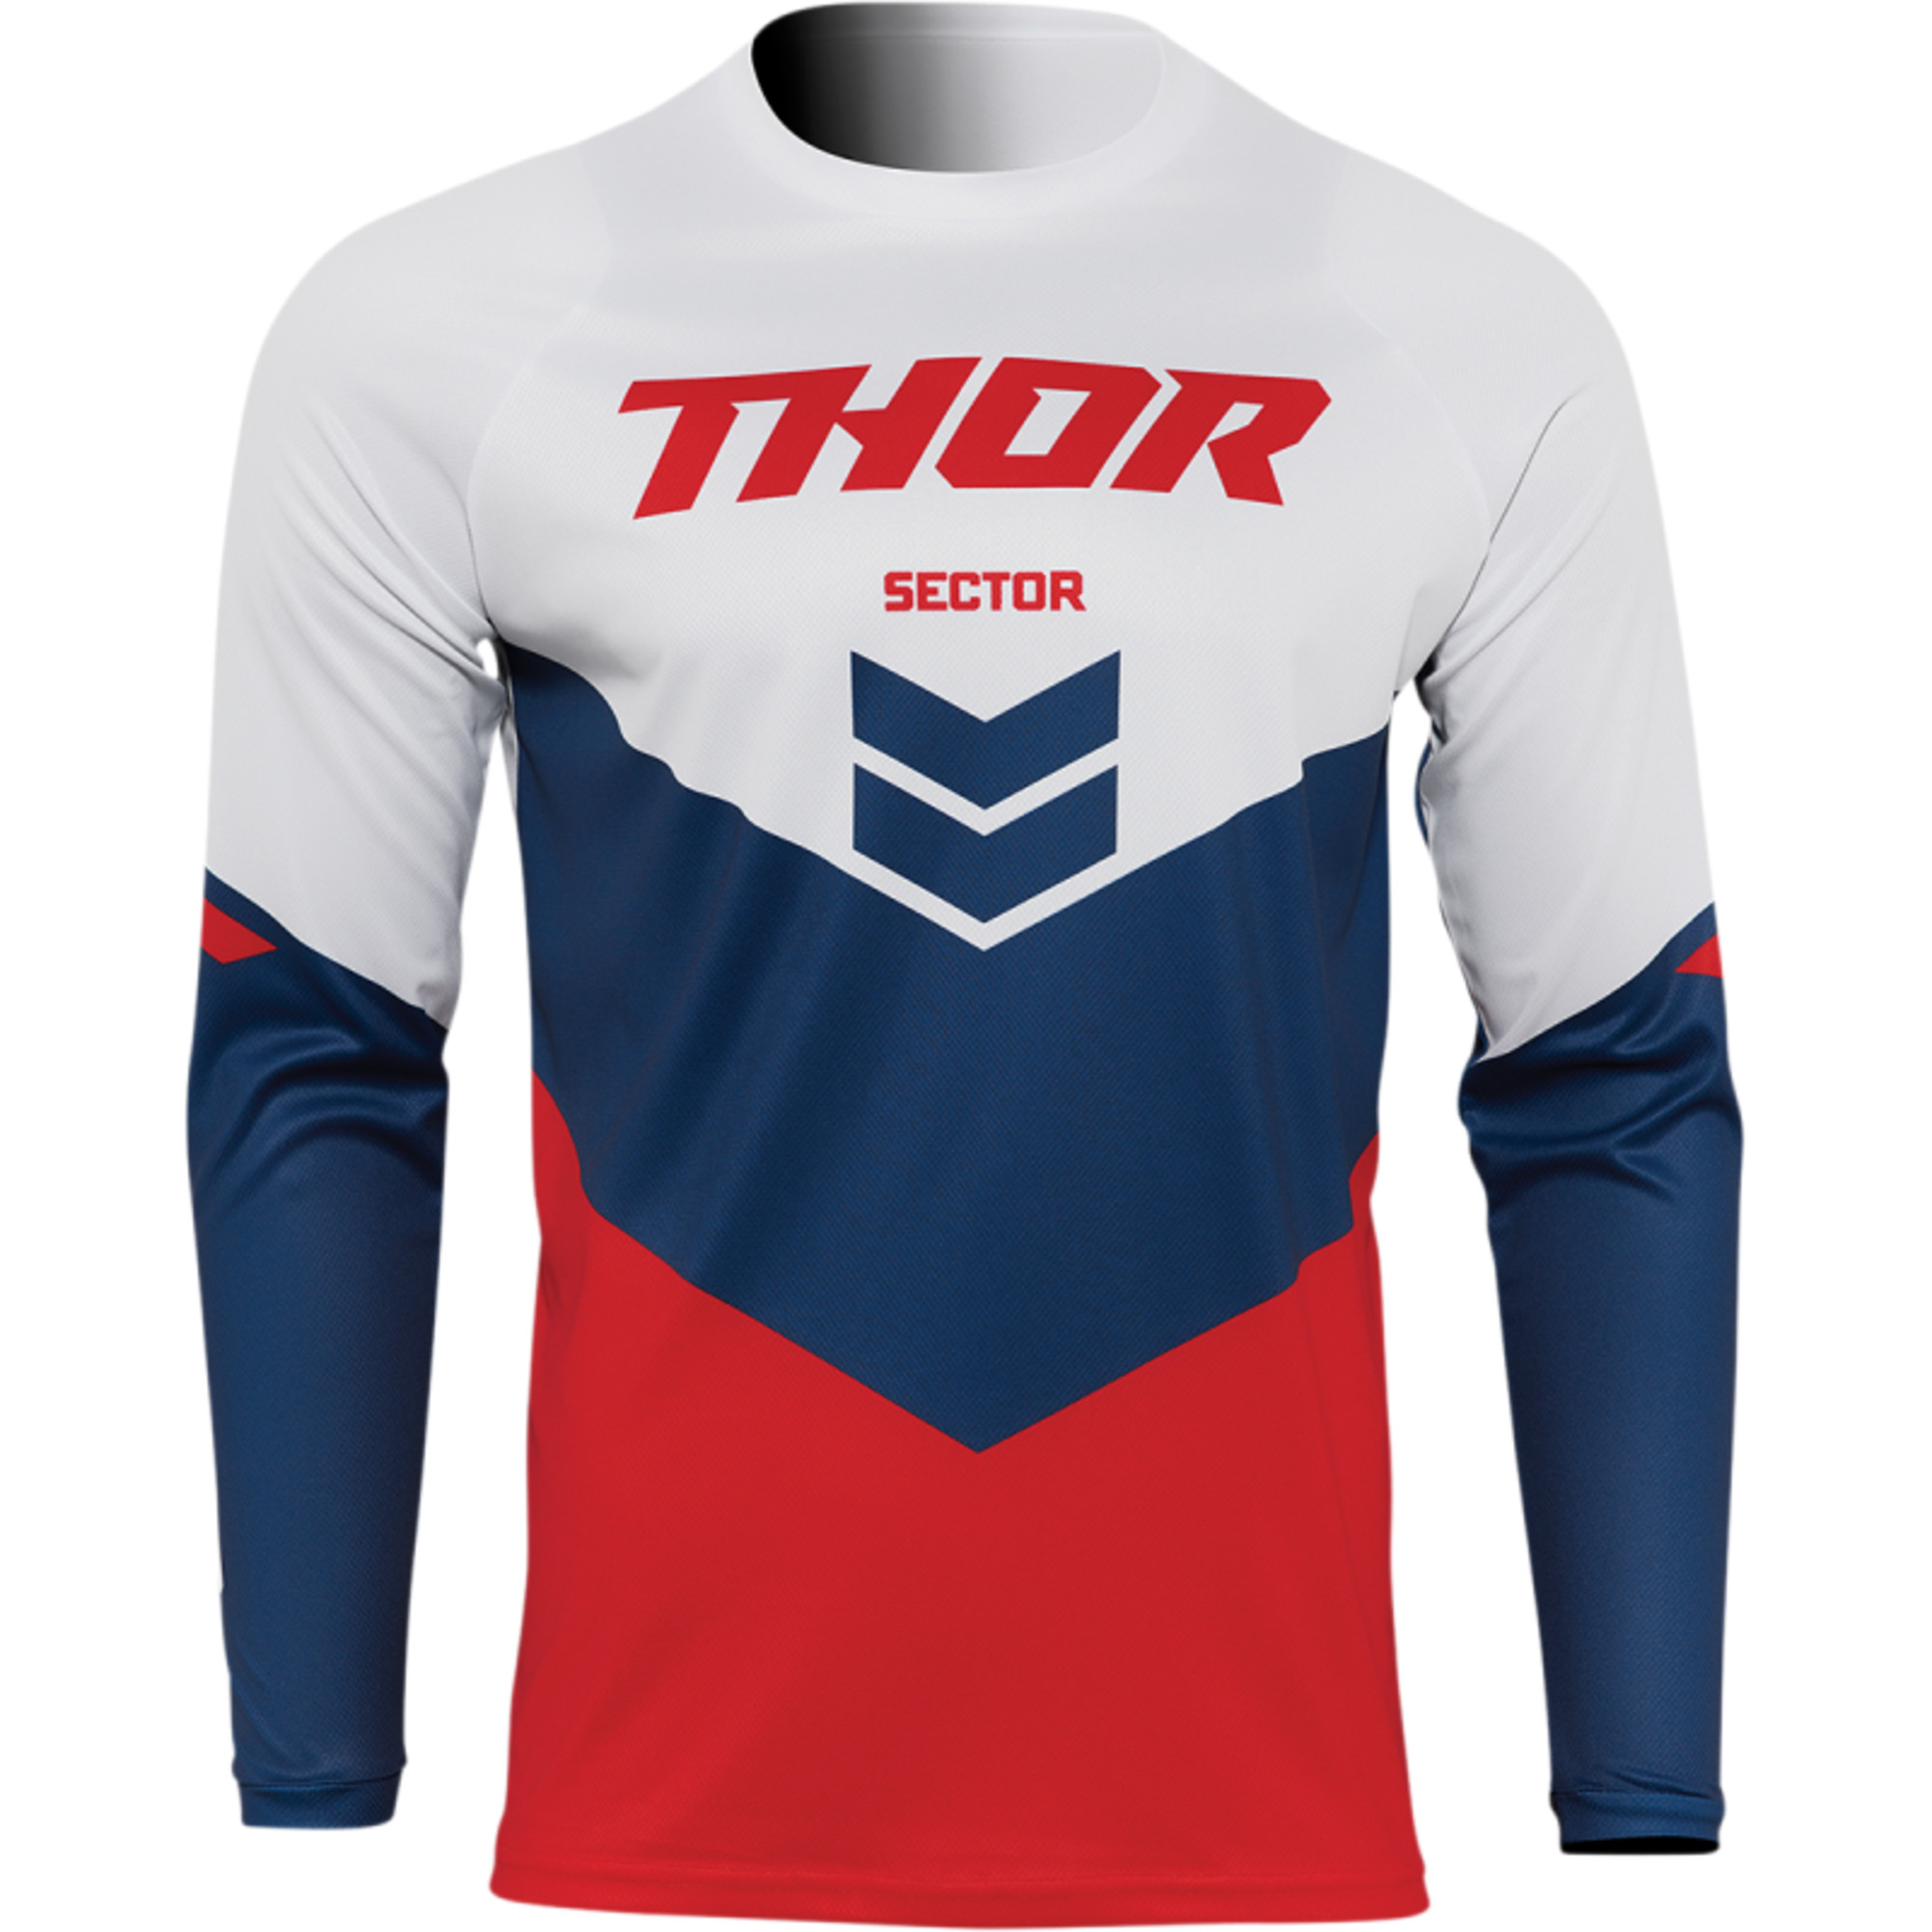 thor jerseys for kids sector chev